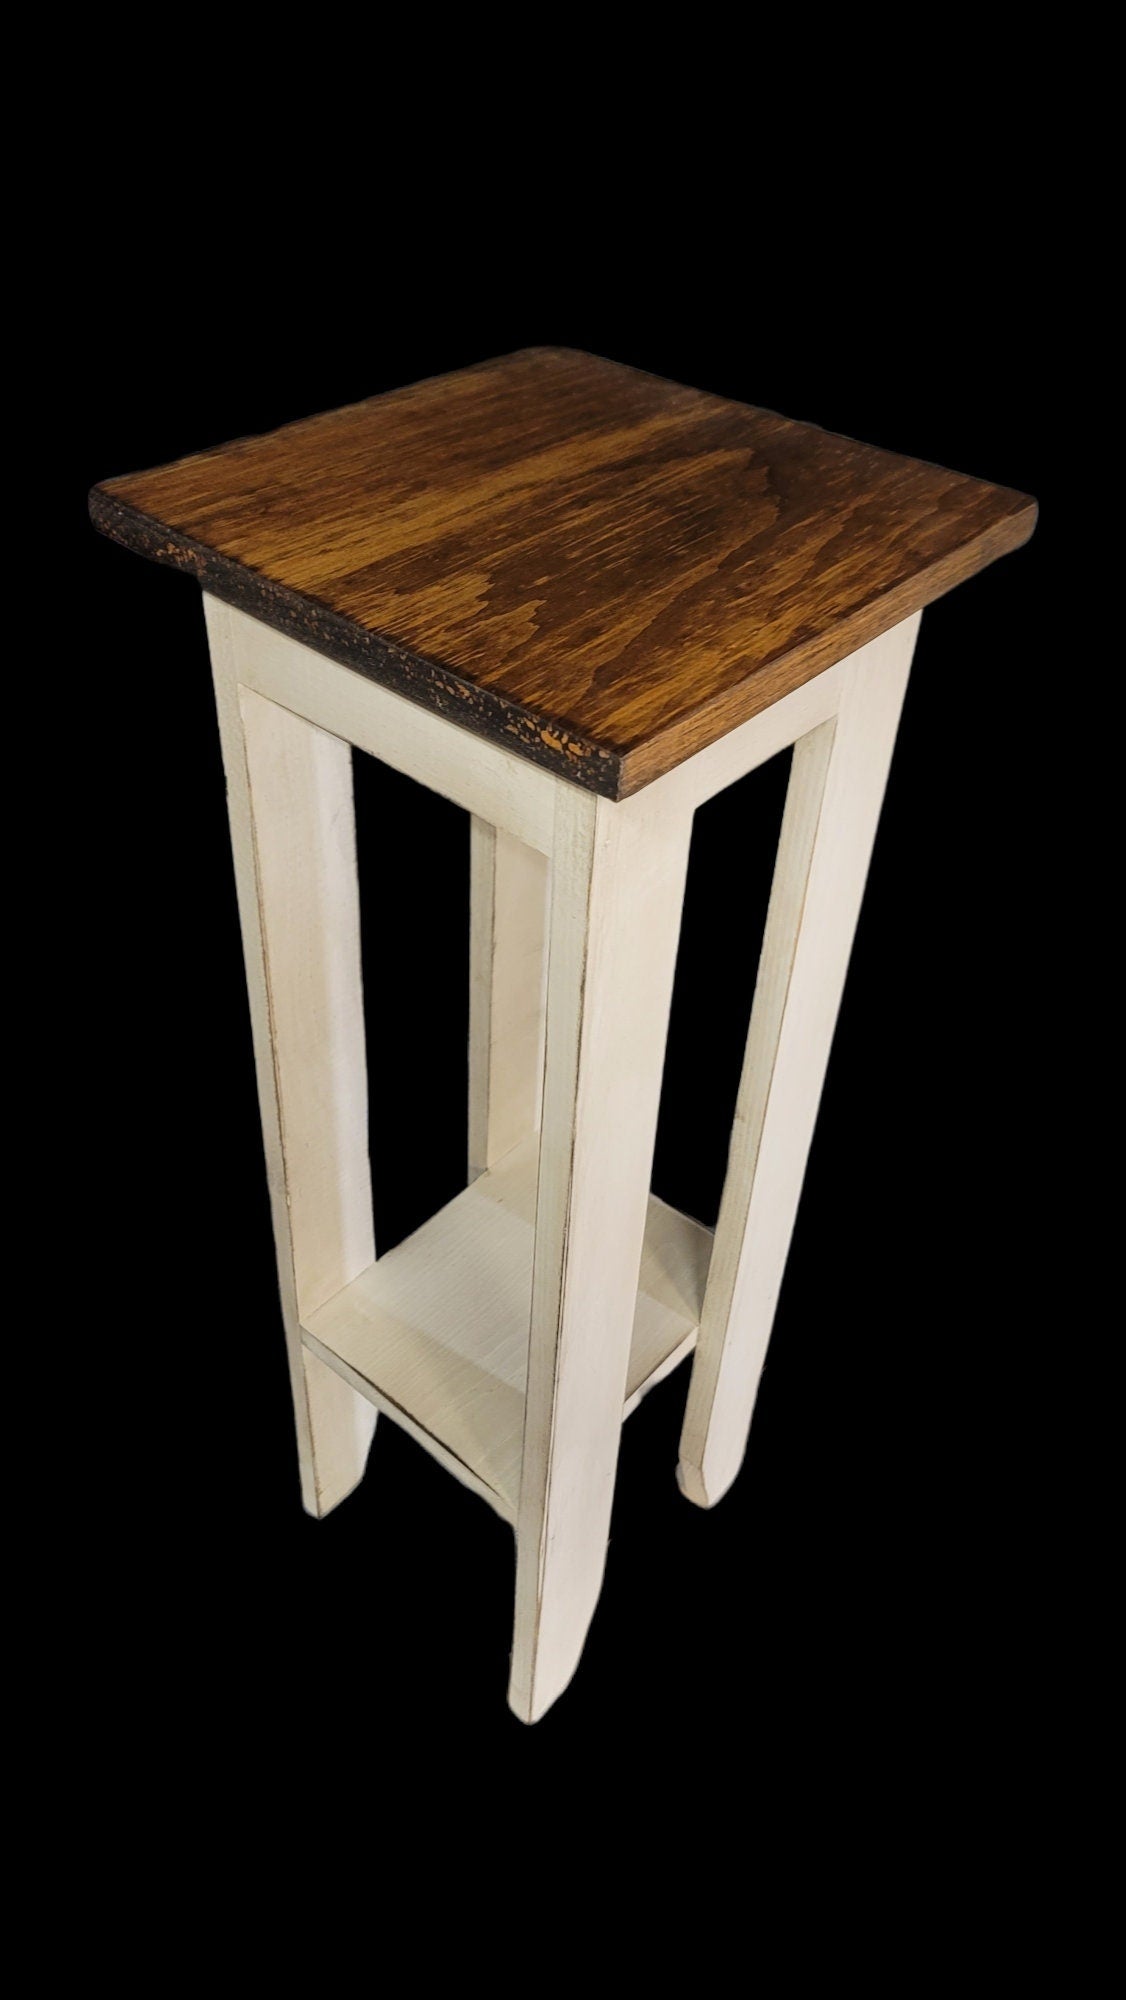 Rustic plant stand accent table